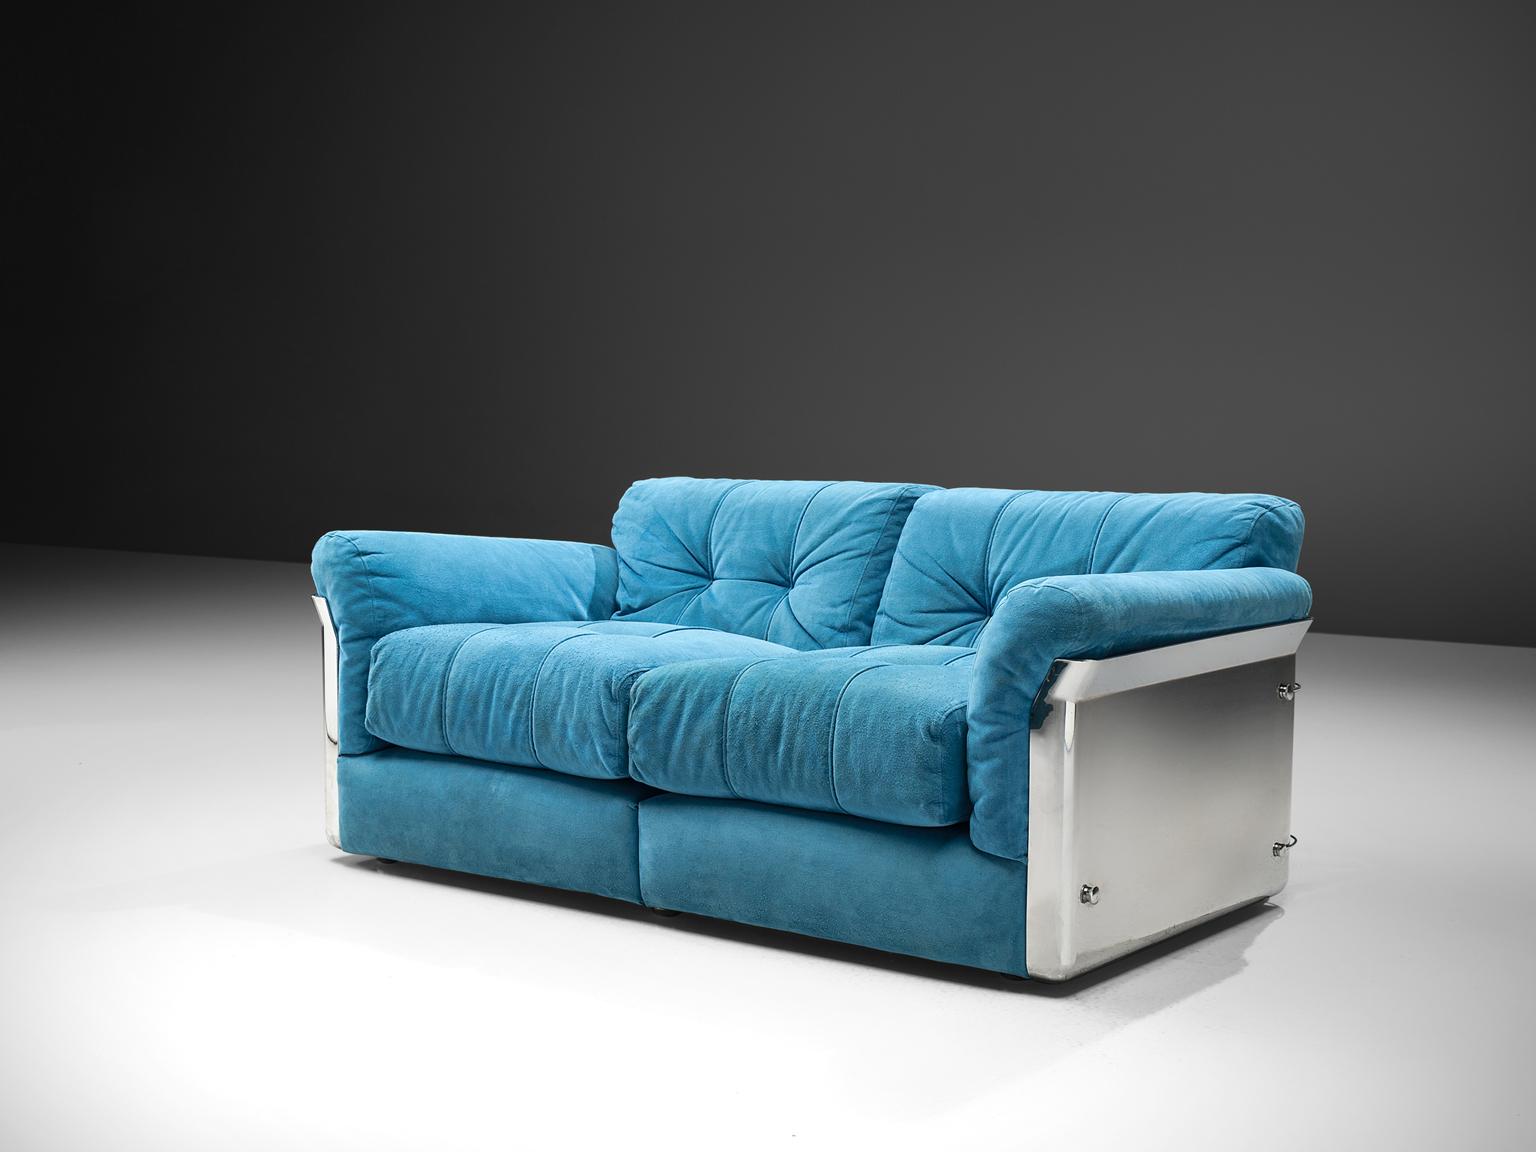 Vittorio Introini for Saporiti, two-seat sofa, blue suede fabric and chrome, Italy, 1969.

This settee is designed by Vittorio Introini and produced by Saporiti in chrome and sea blue upholstery. The piece features a steel shell with thick,